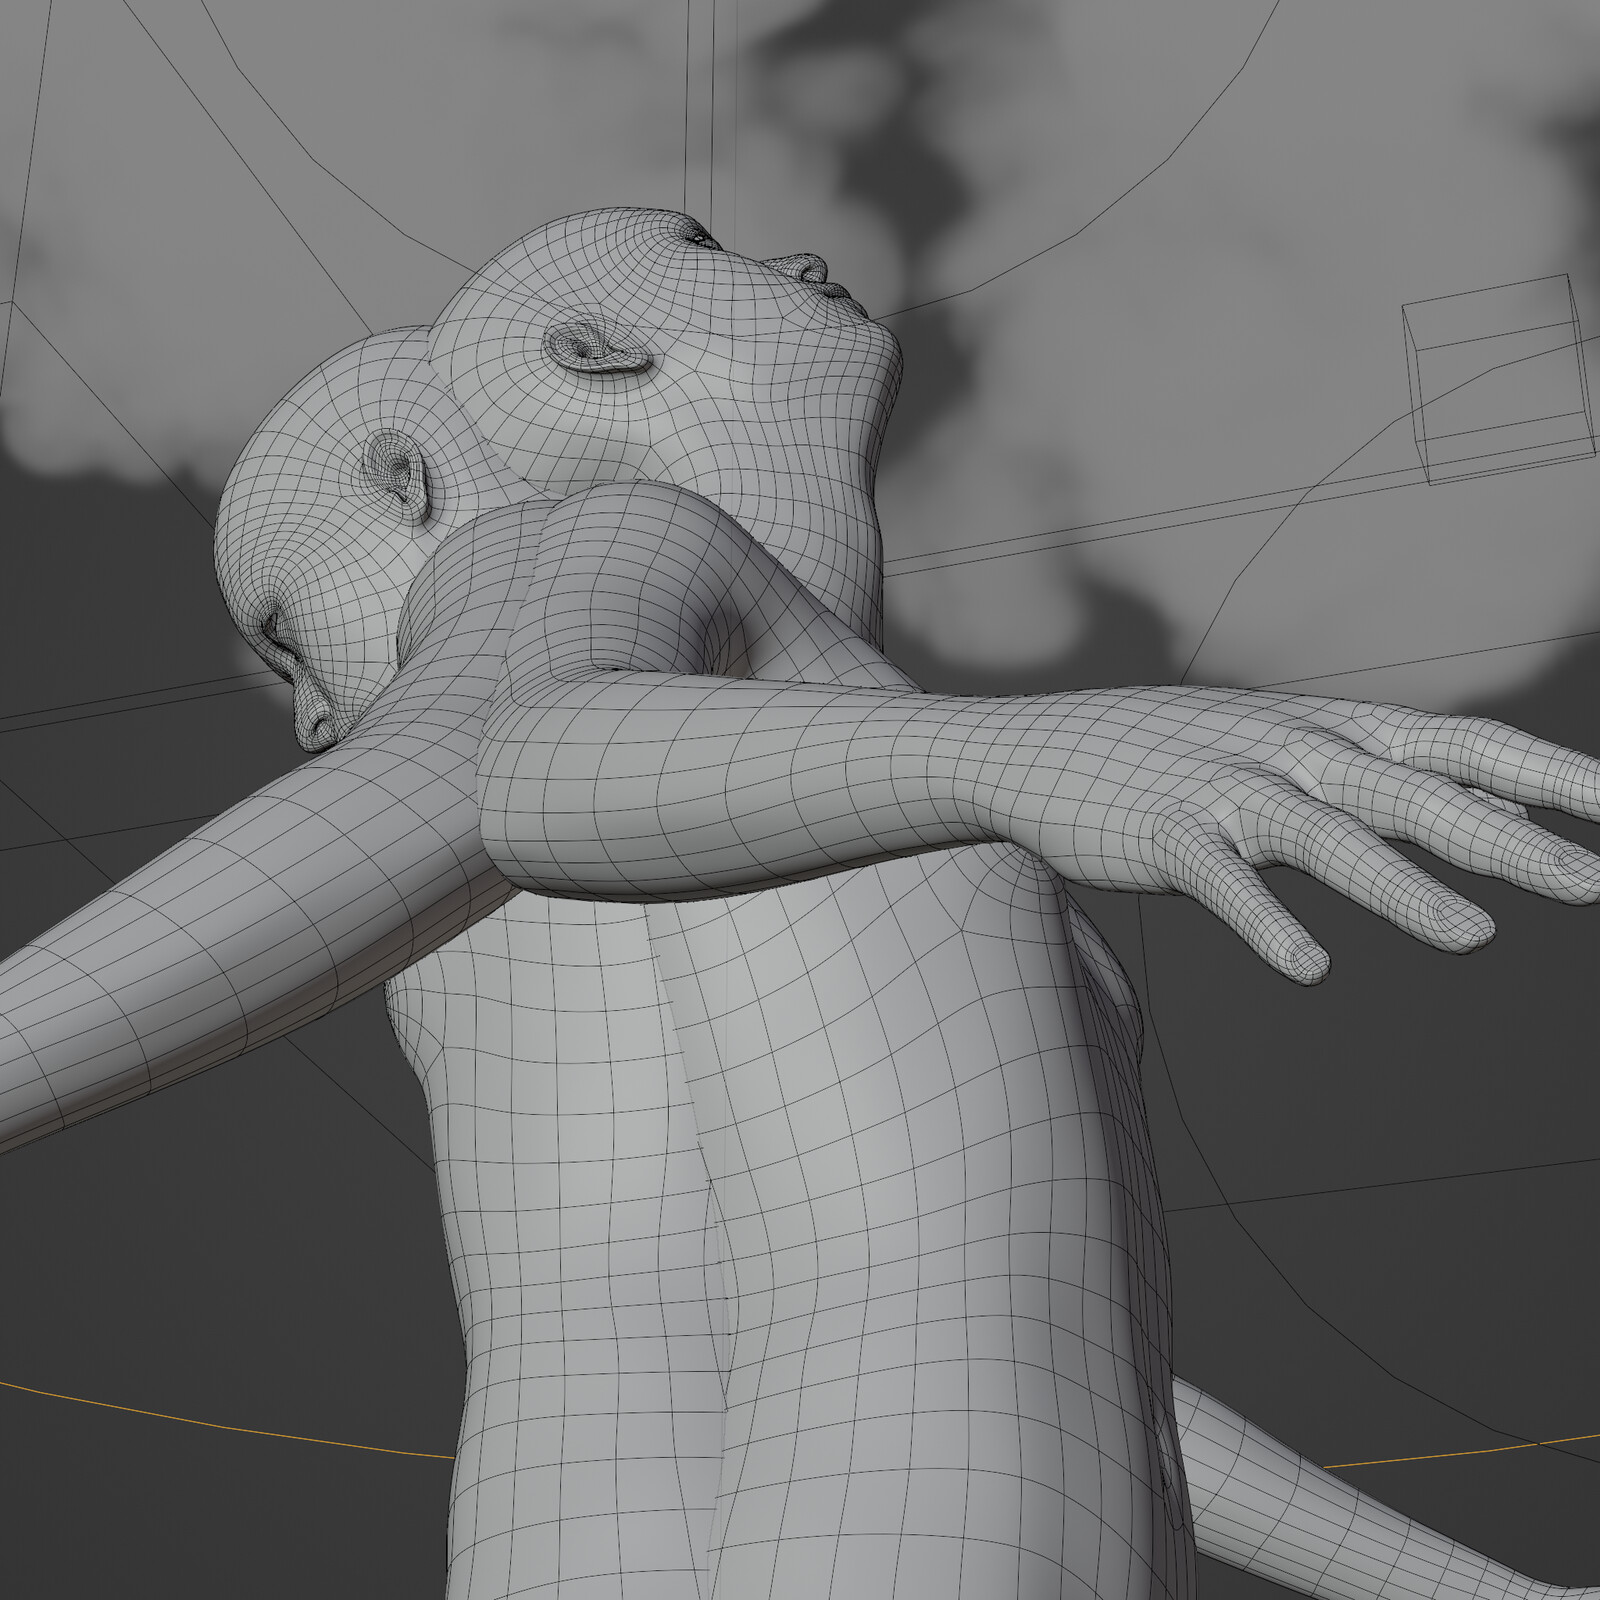 Clay/wireframe render